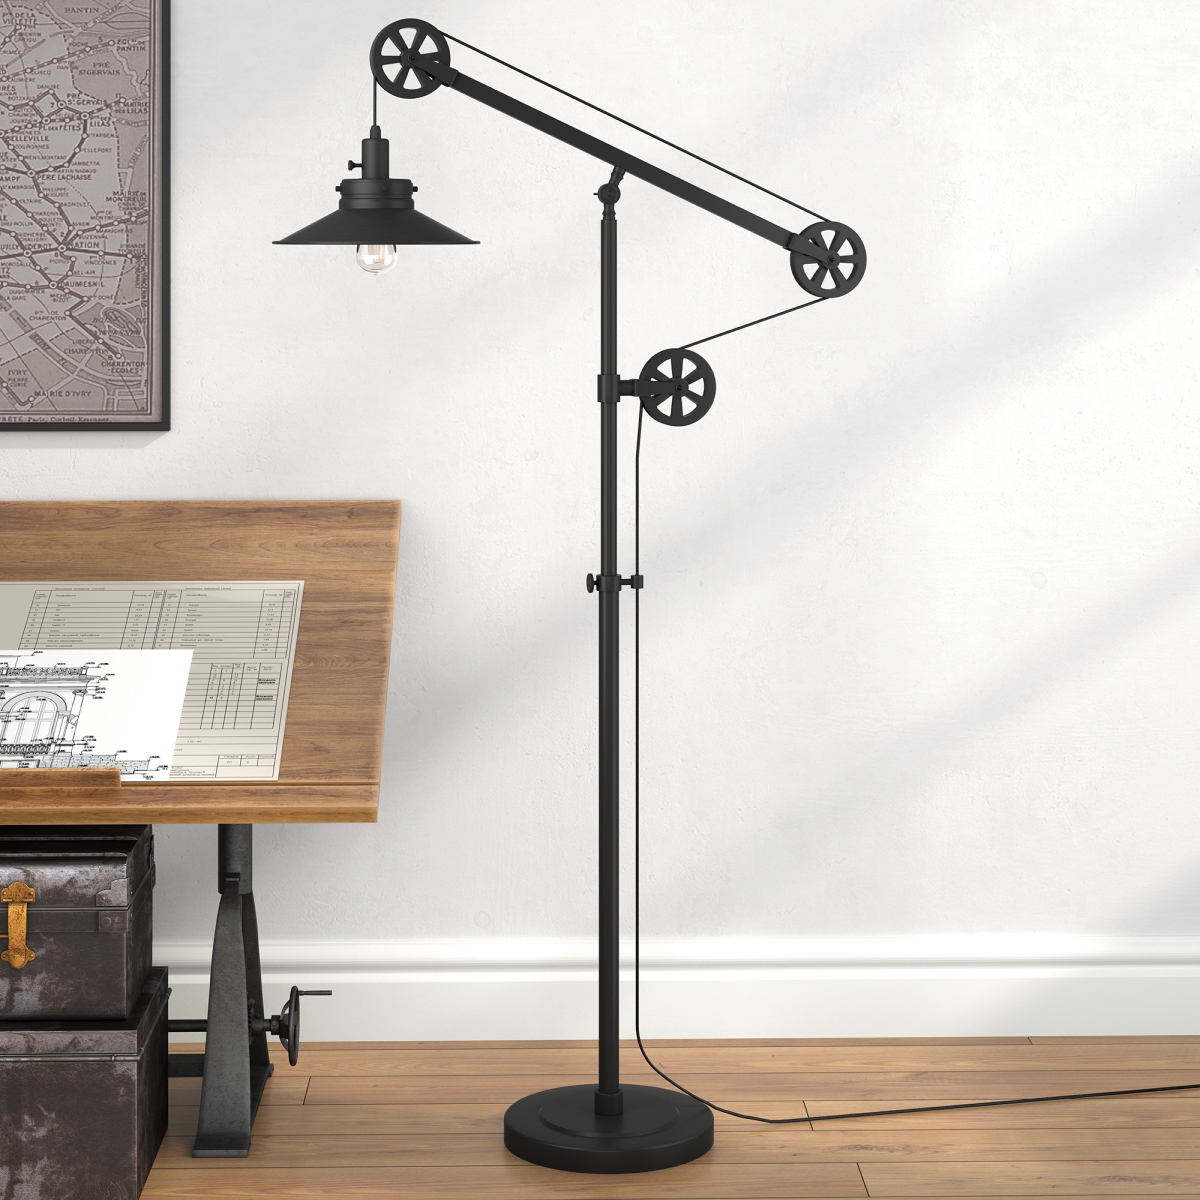 Picture of Henn & Hart FL0147 Descartes Wide Brim Blackened Bronze Floor Lamp with Pulley System